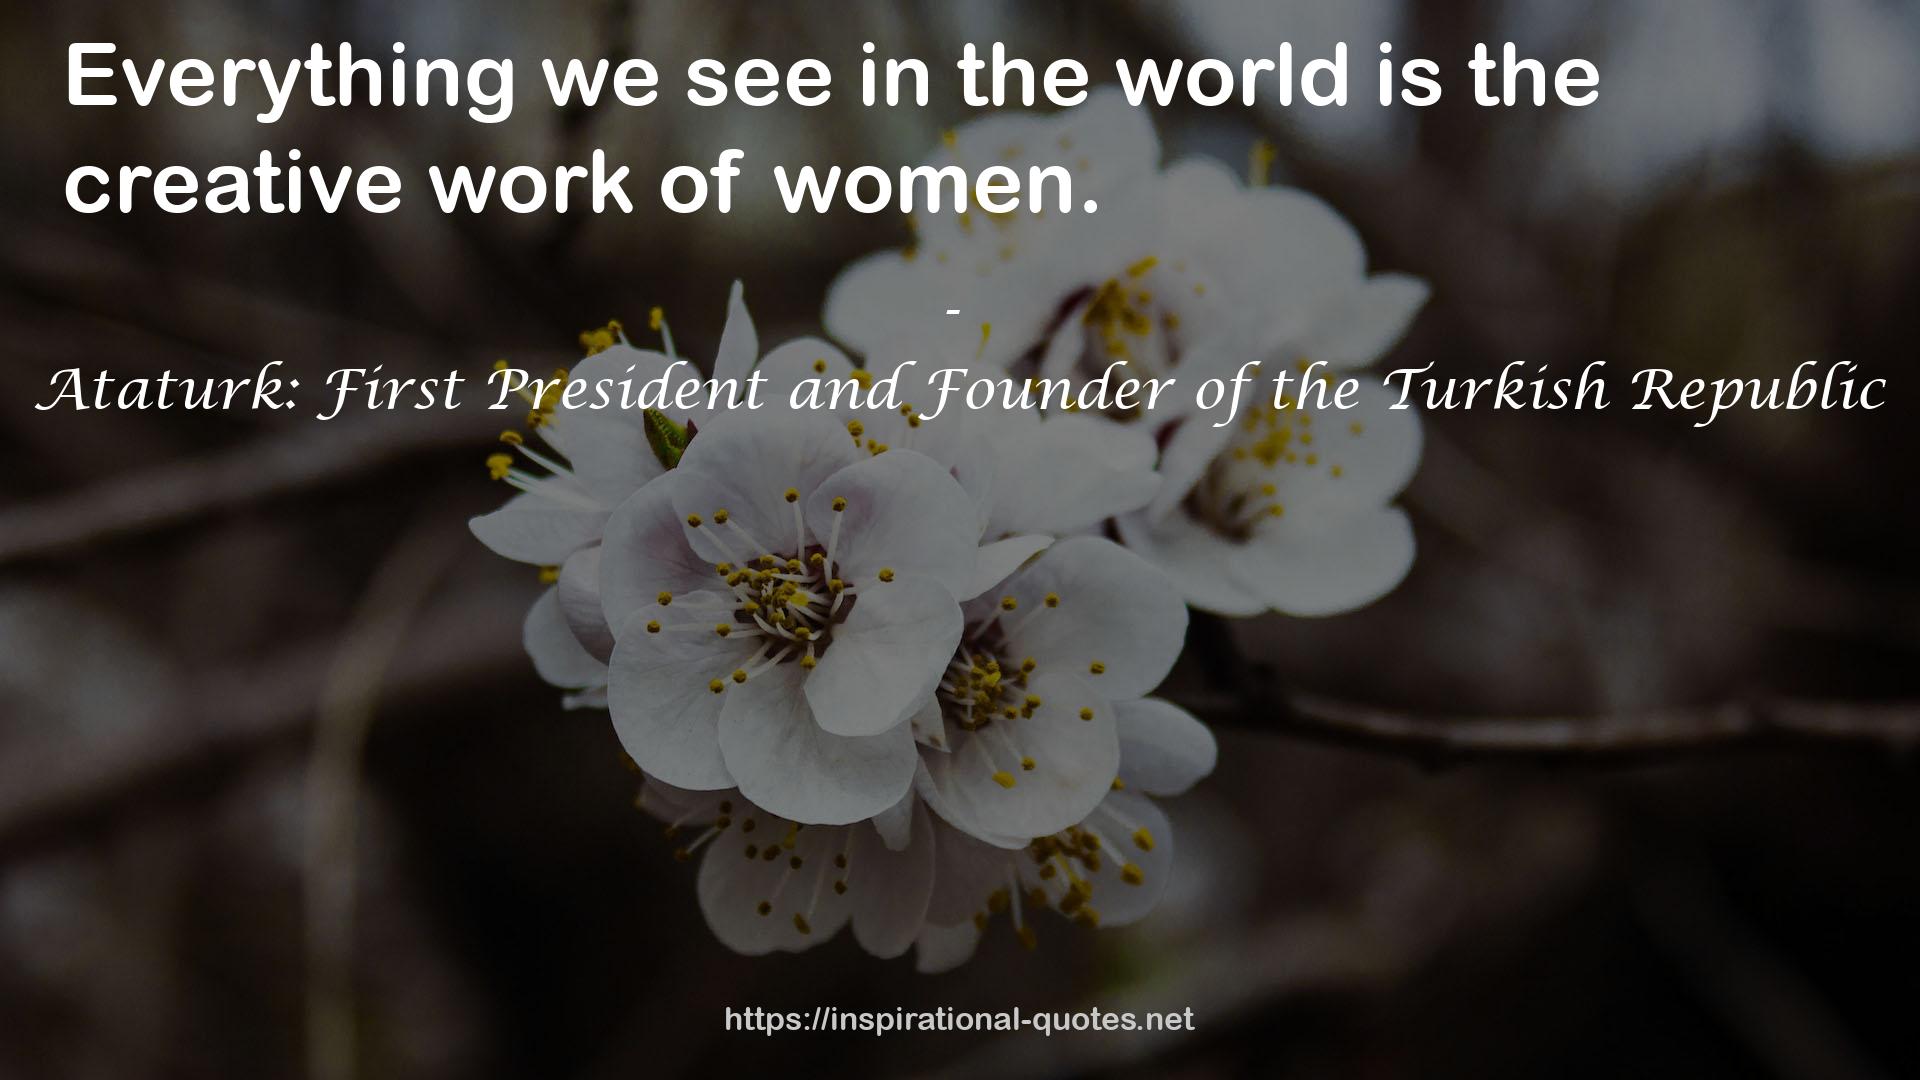 Ataturk: First President and Founder of the Turkish Republic QUOTES